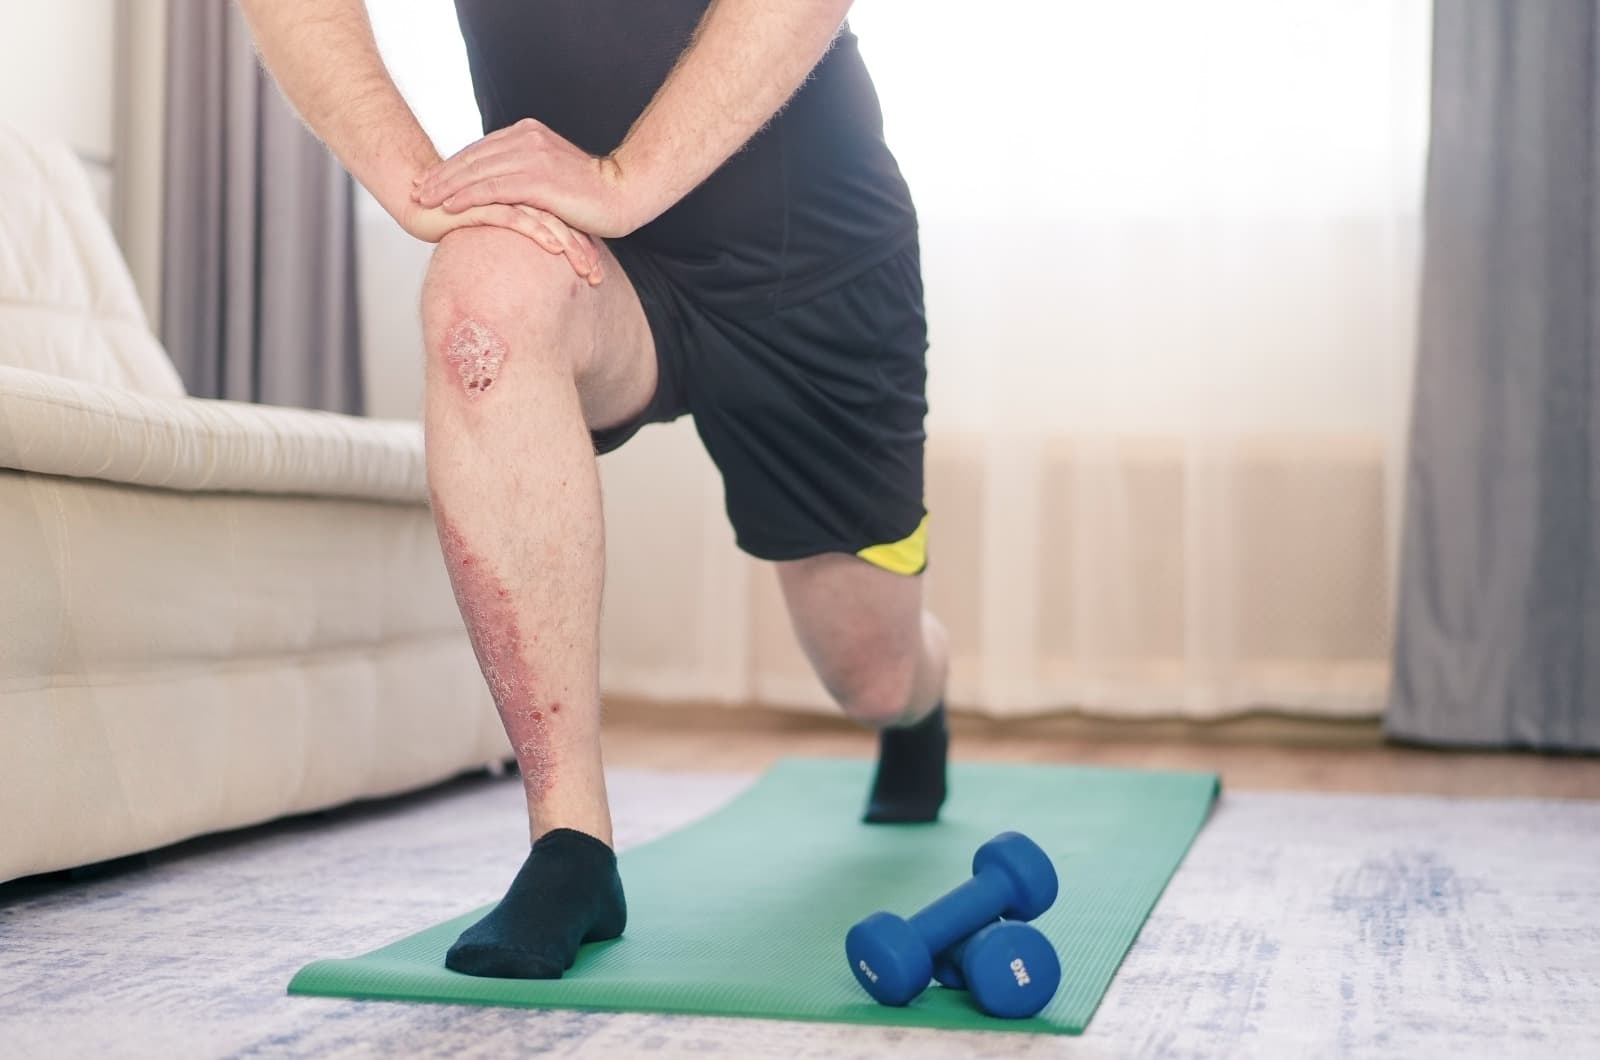 The benefits of exercise for psoriasis